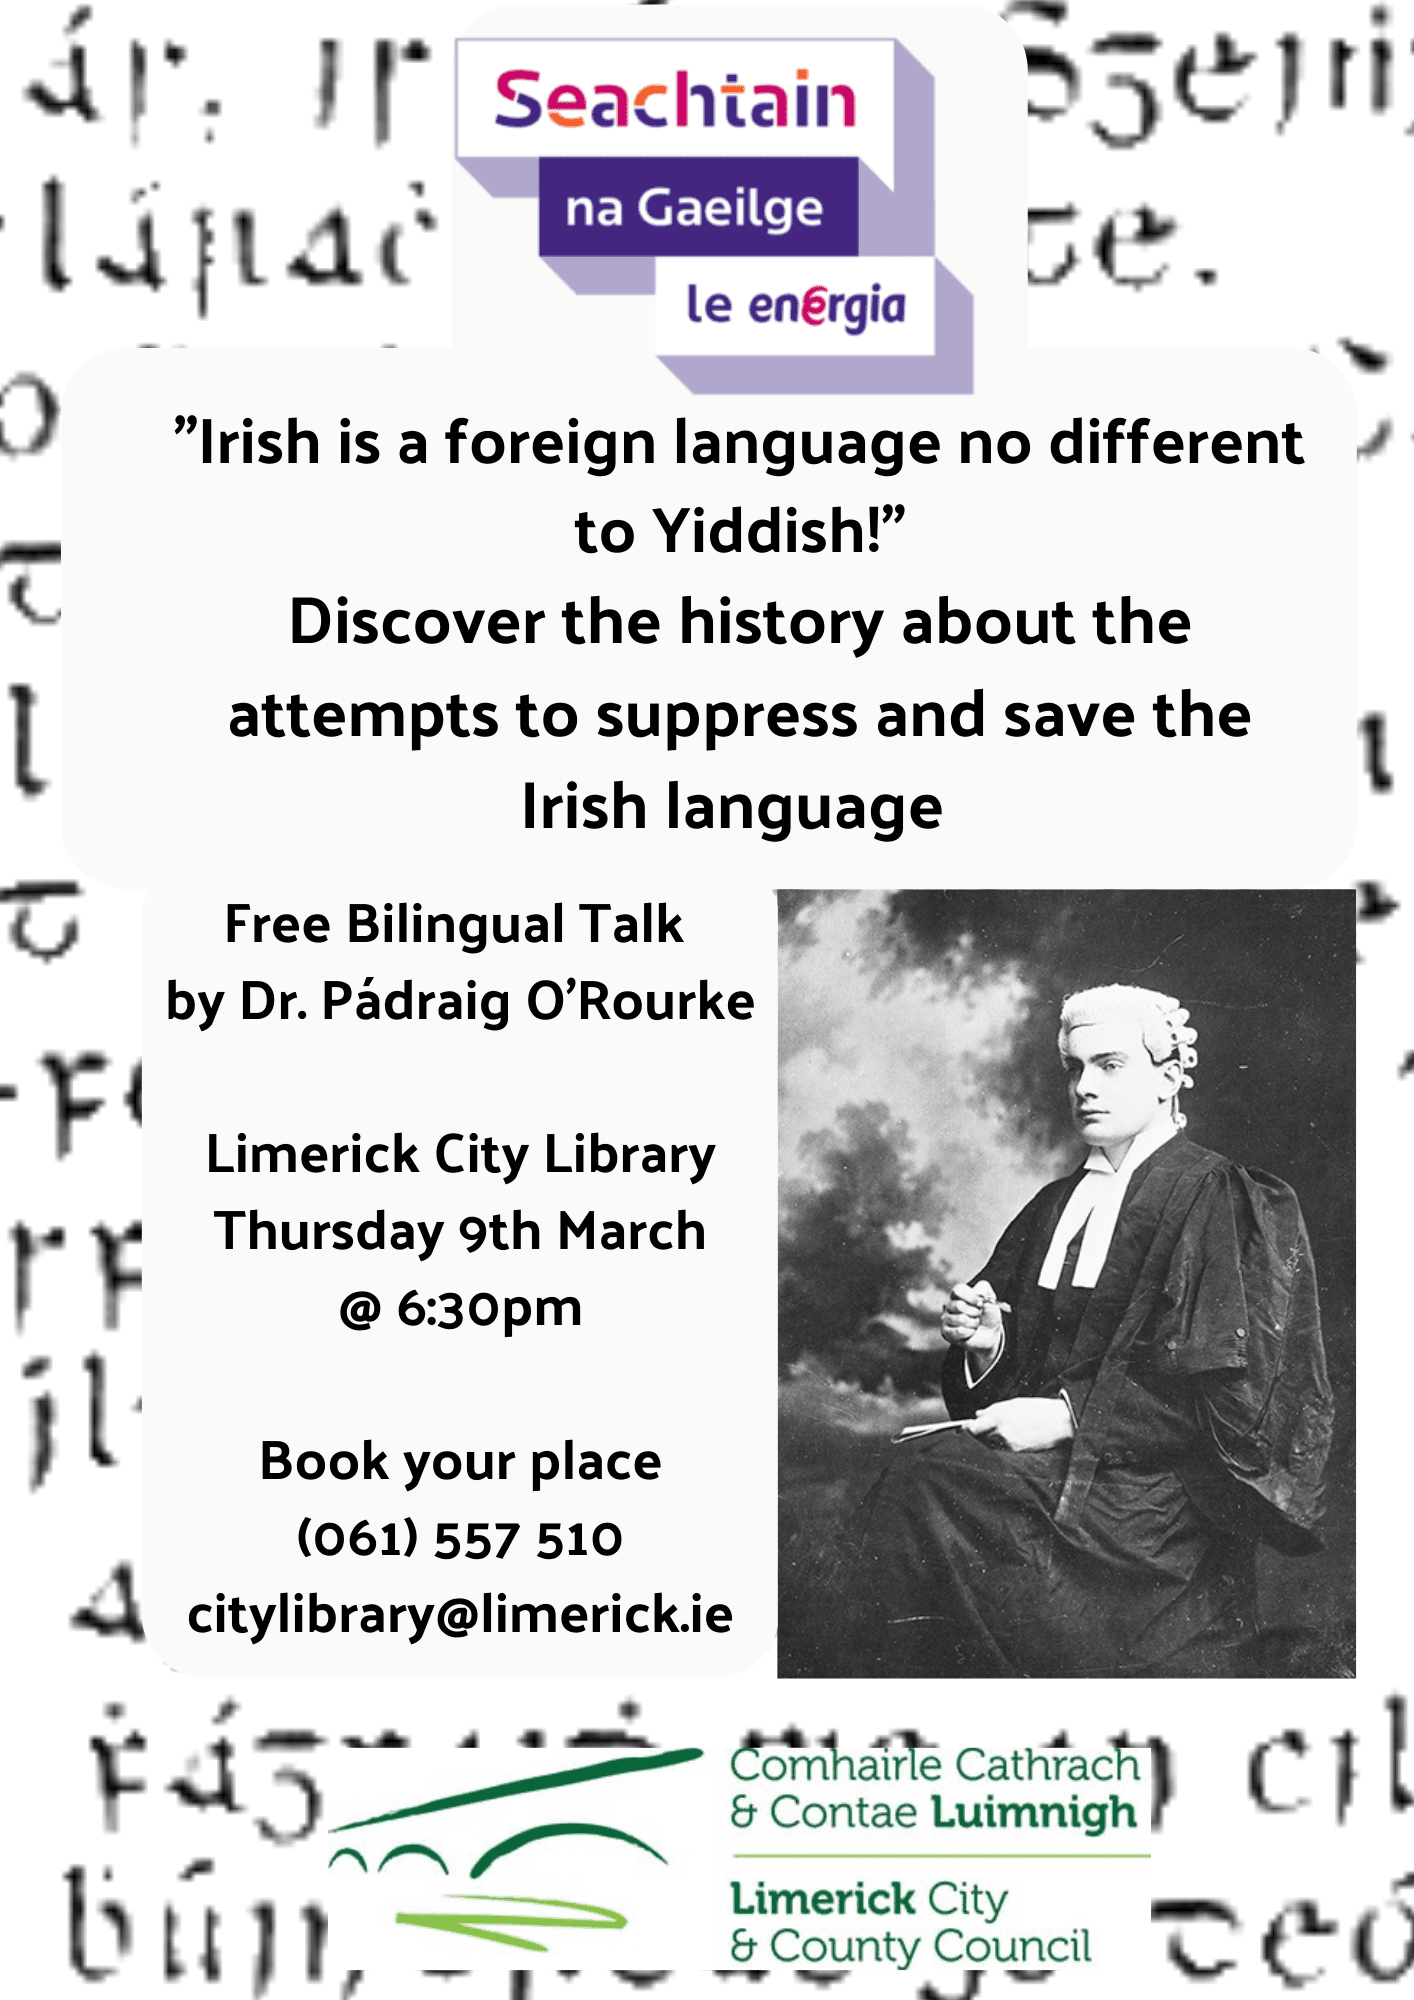 “Irish is a foreign language no different to Yiddish!”: Discover the hidden history about the attempts to suppress and save the Irish language